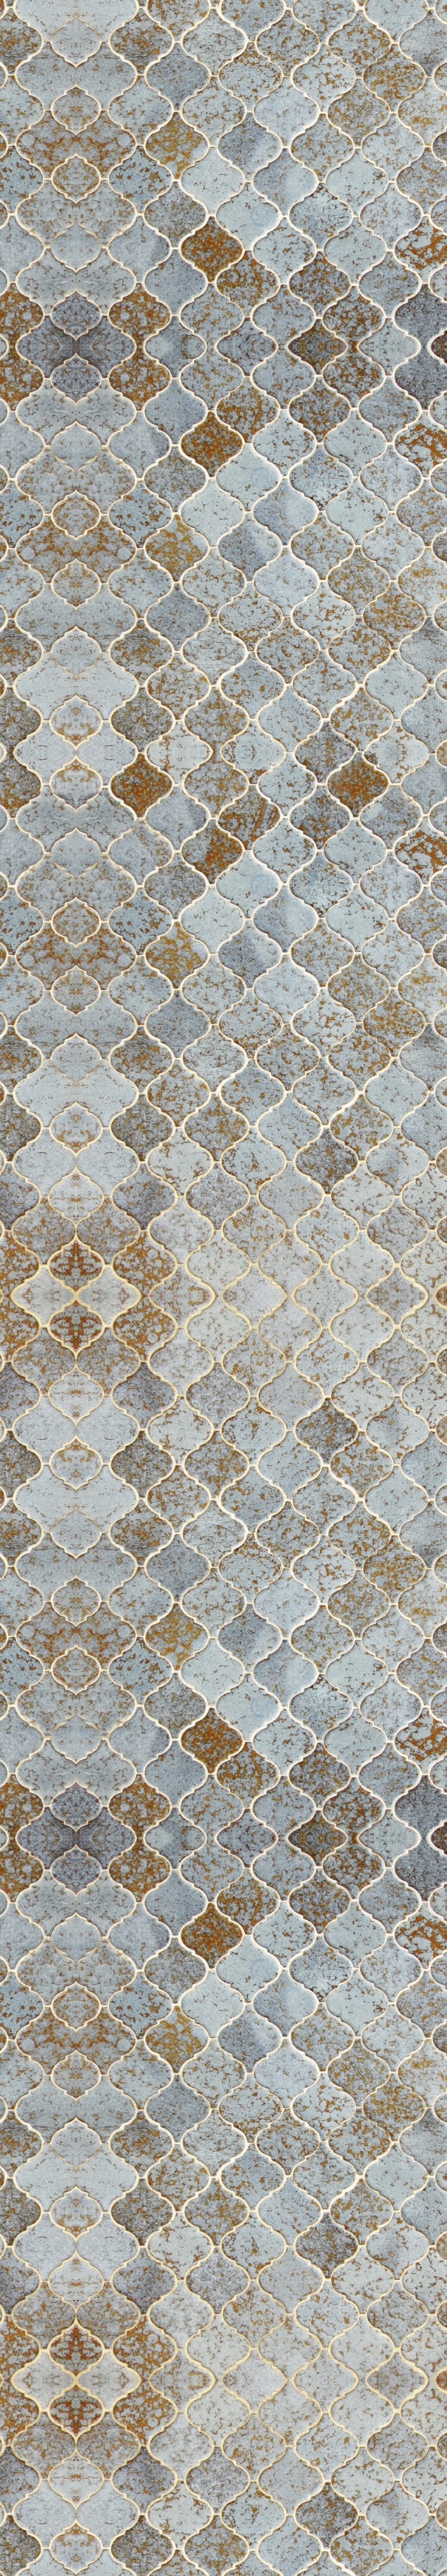 Picture of Morocco Tiles - WP20262